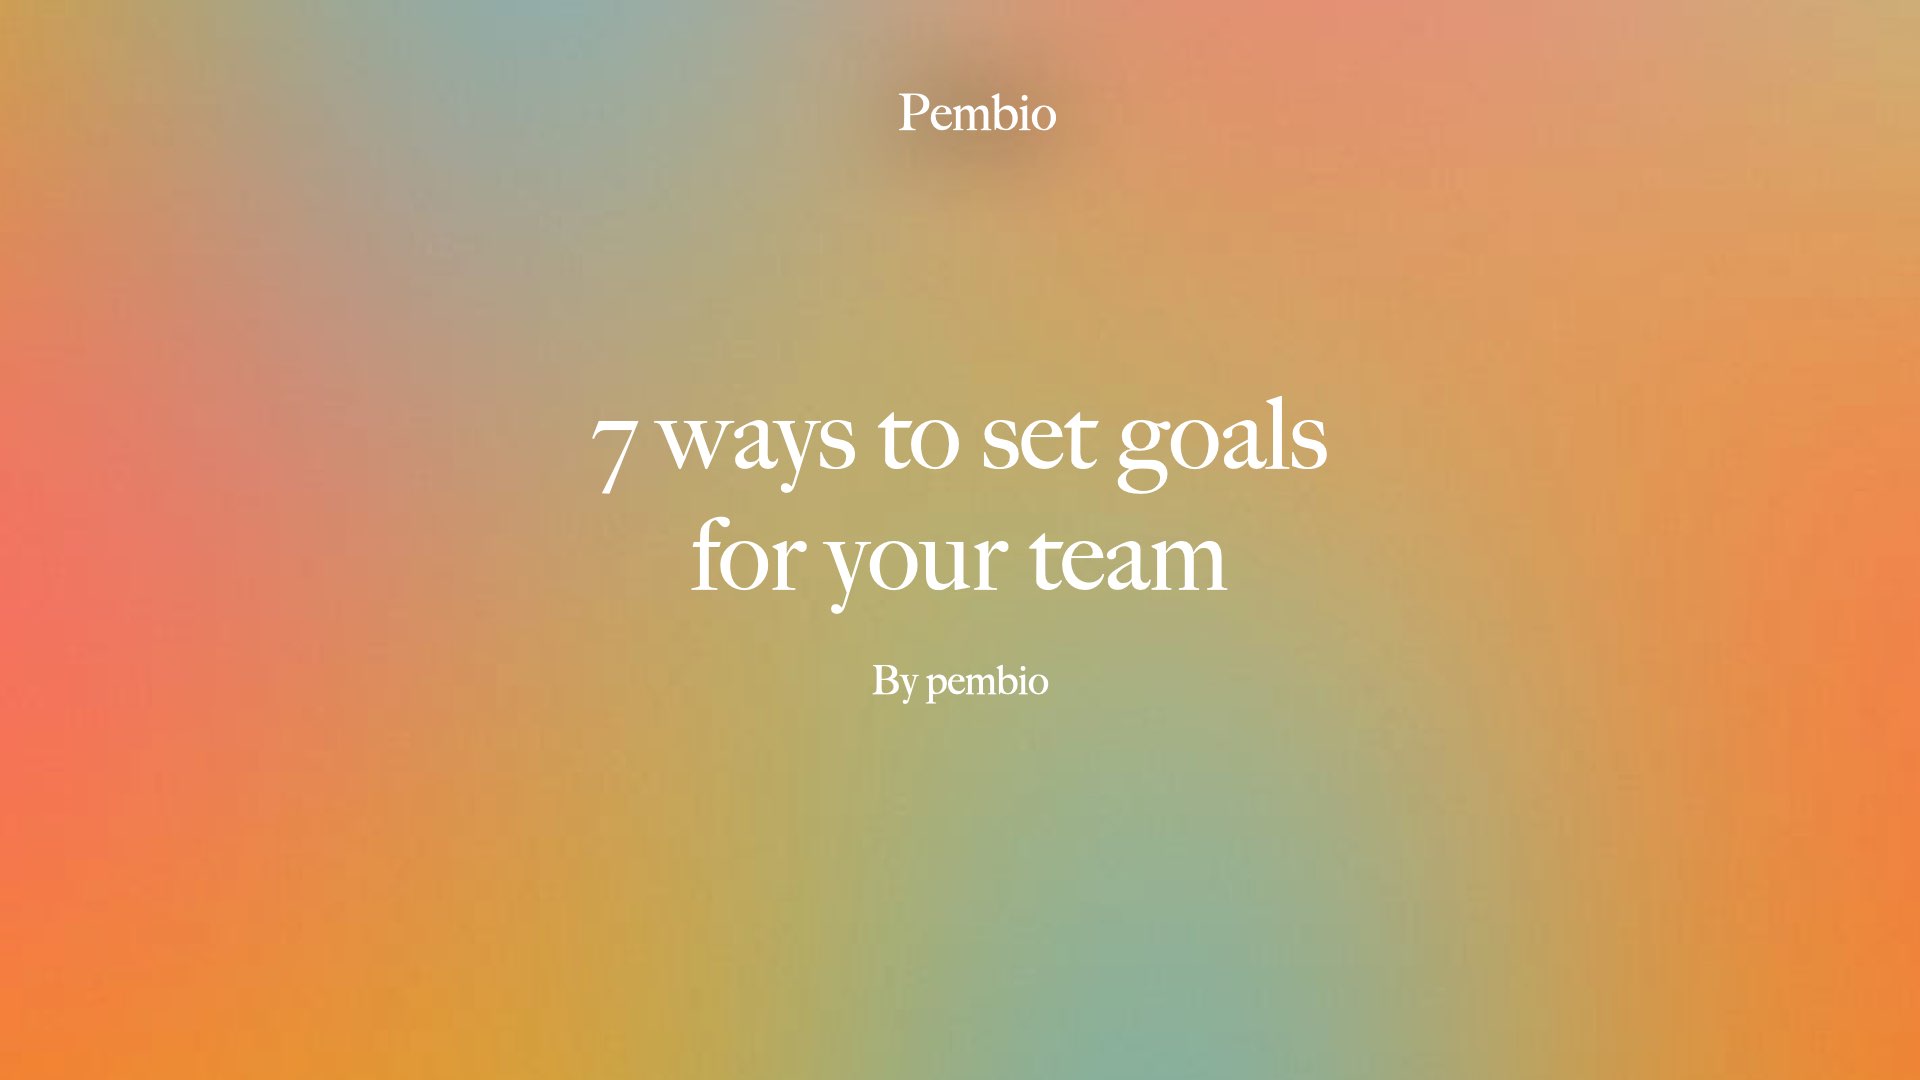 7 ways to set goals for teams